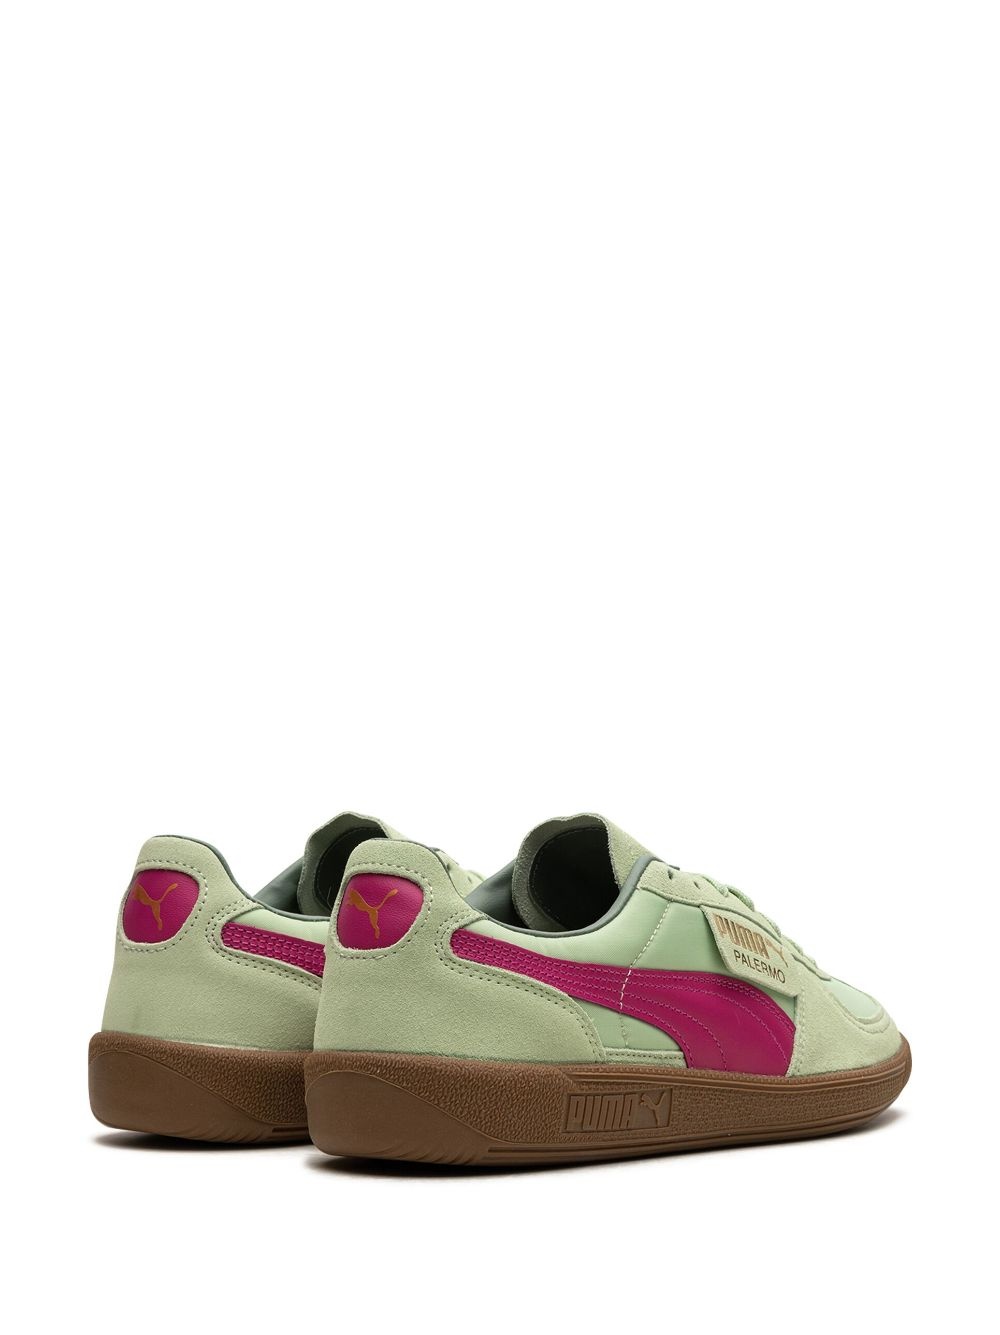 Palermo OG "Light Mint/Orchid Shadow/Gum" sneakers - 3